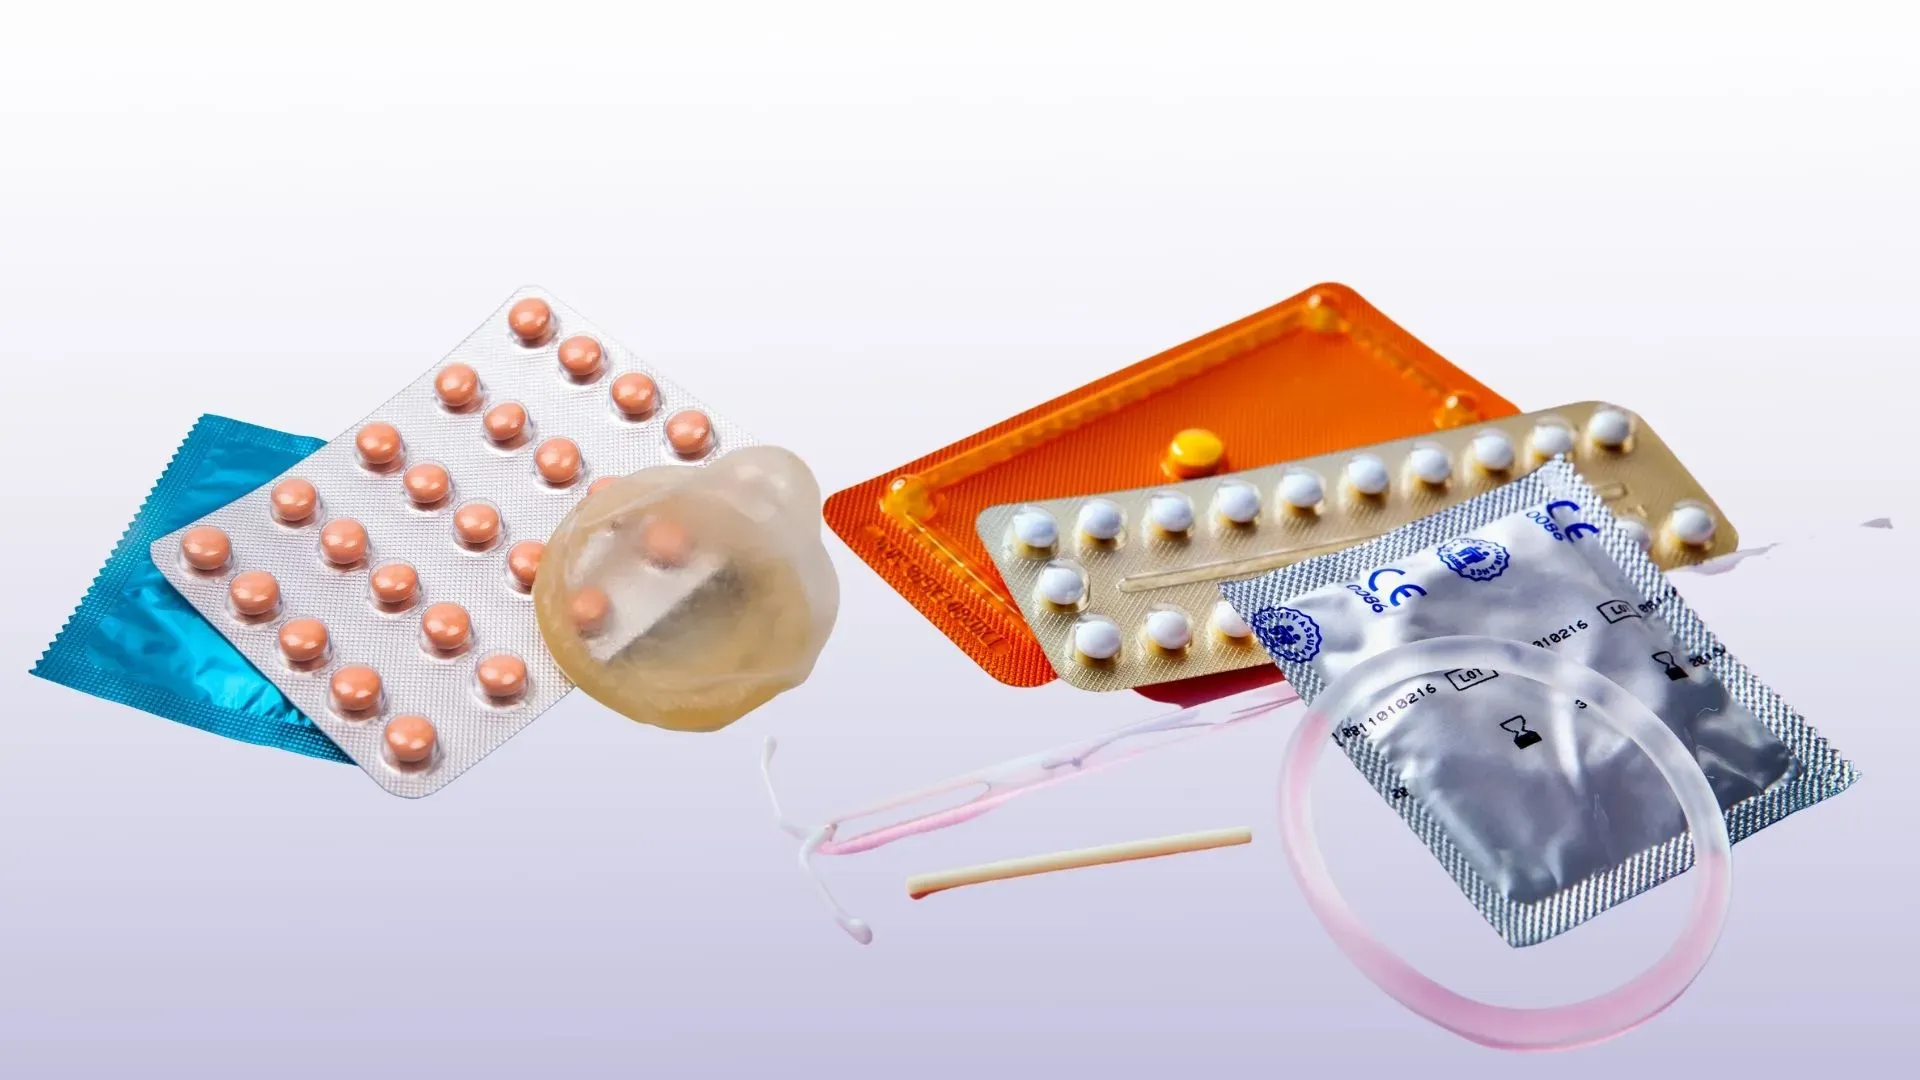 Contraceptive Methods and What You Need to Know